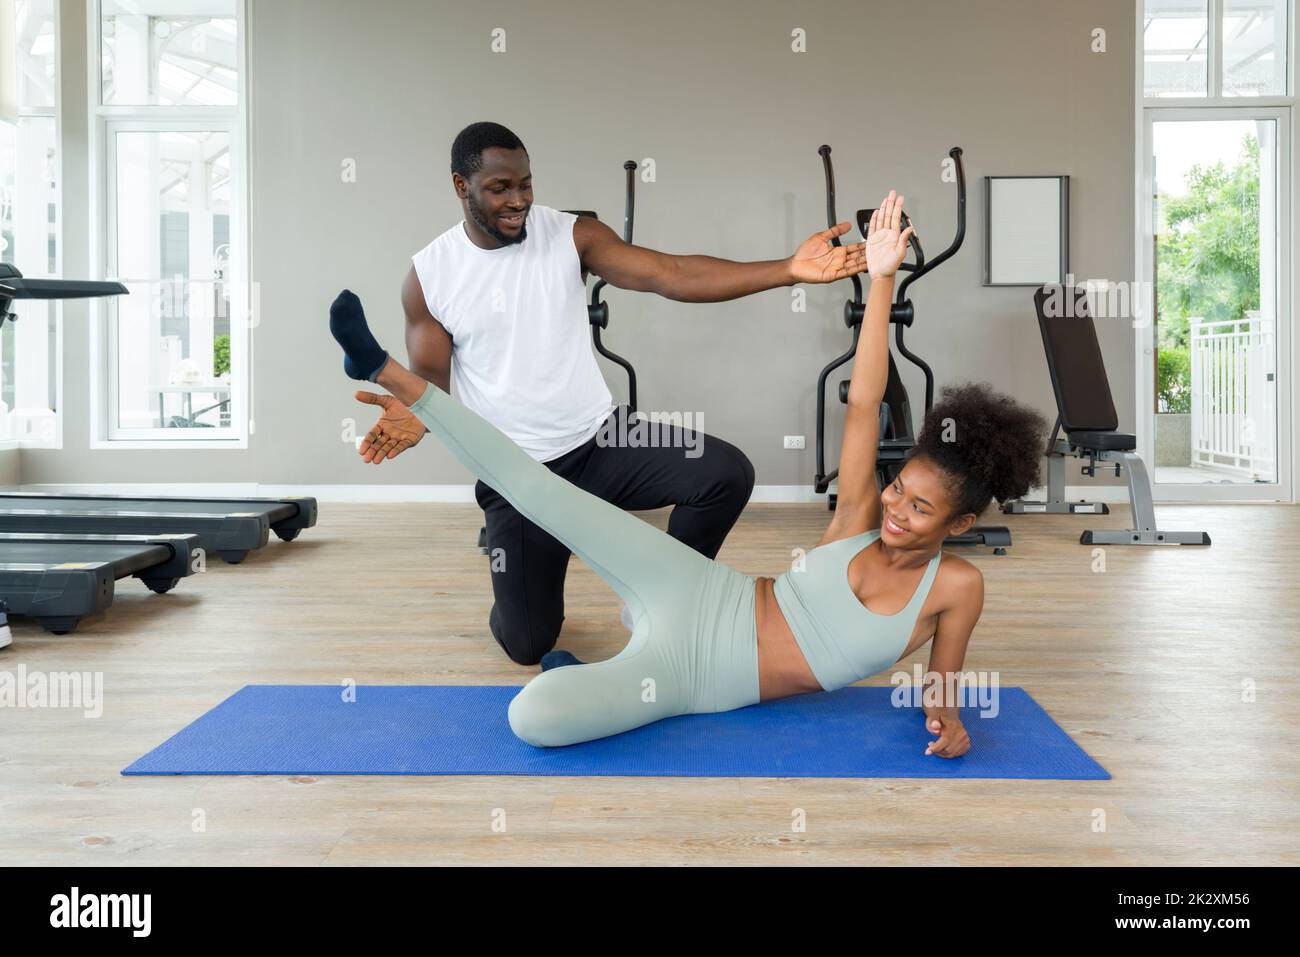 Short curly black hair coach with moustache and beard teach young woman in sportswear how to do side plank crunch. Cardio machines are on the background at the gym. Stock Photo